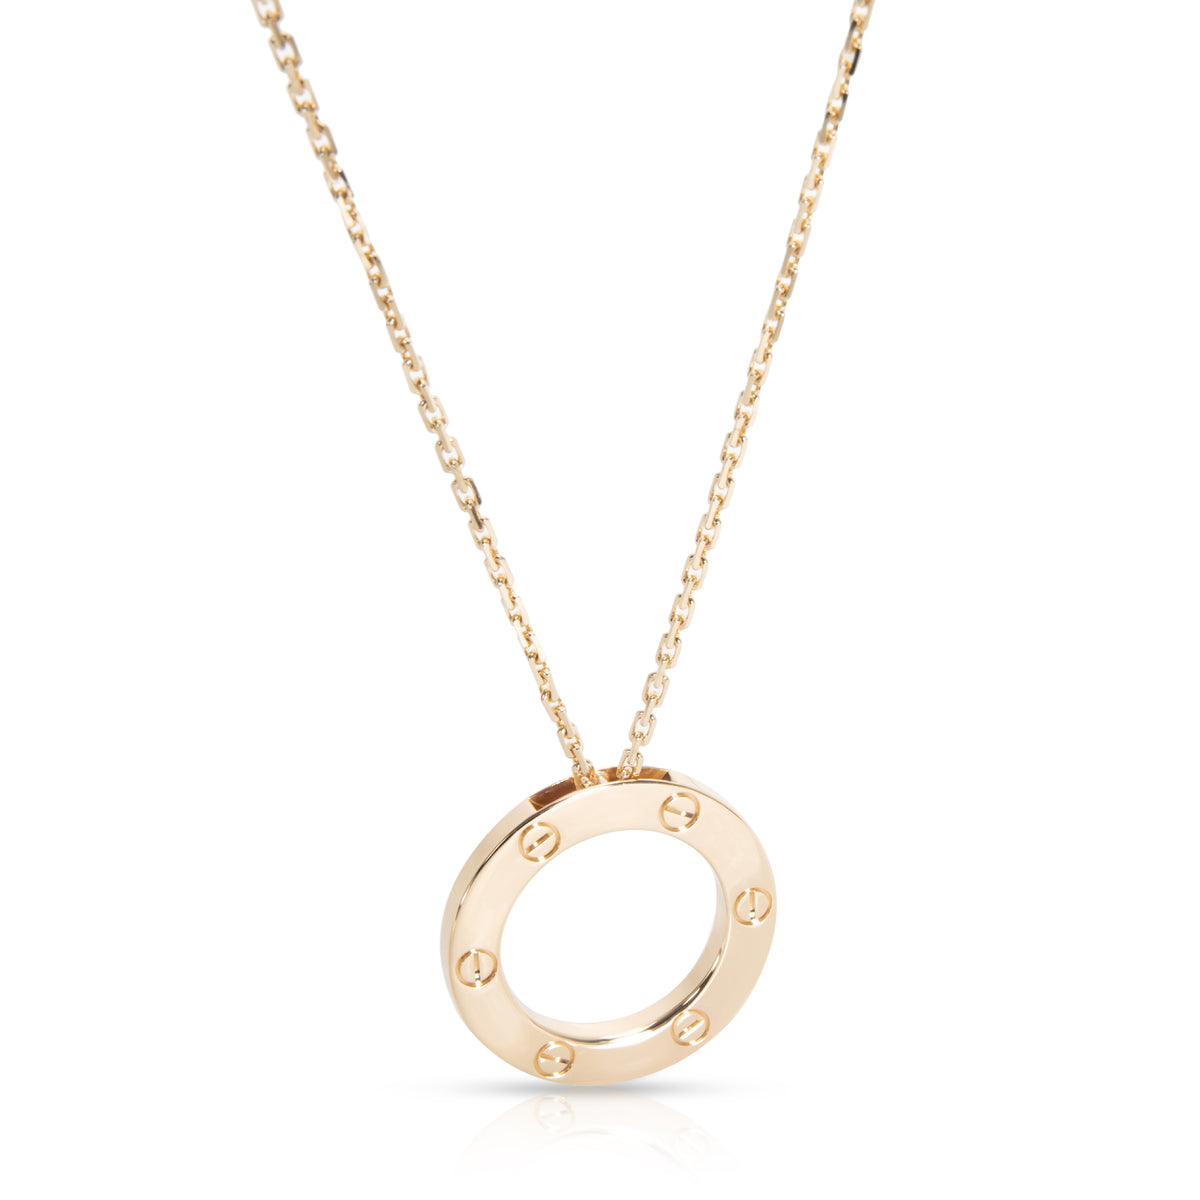 Cartier Love Necklace in 18K Yellow Gold